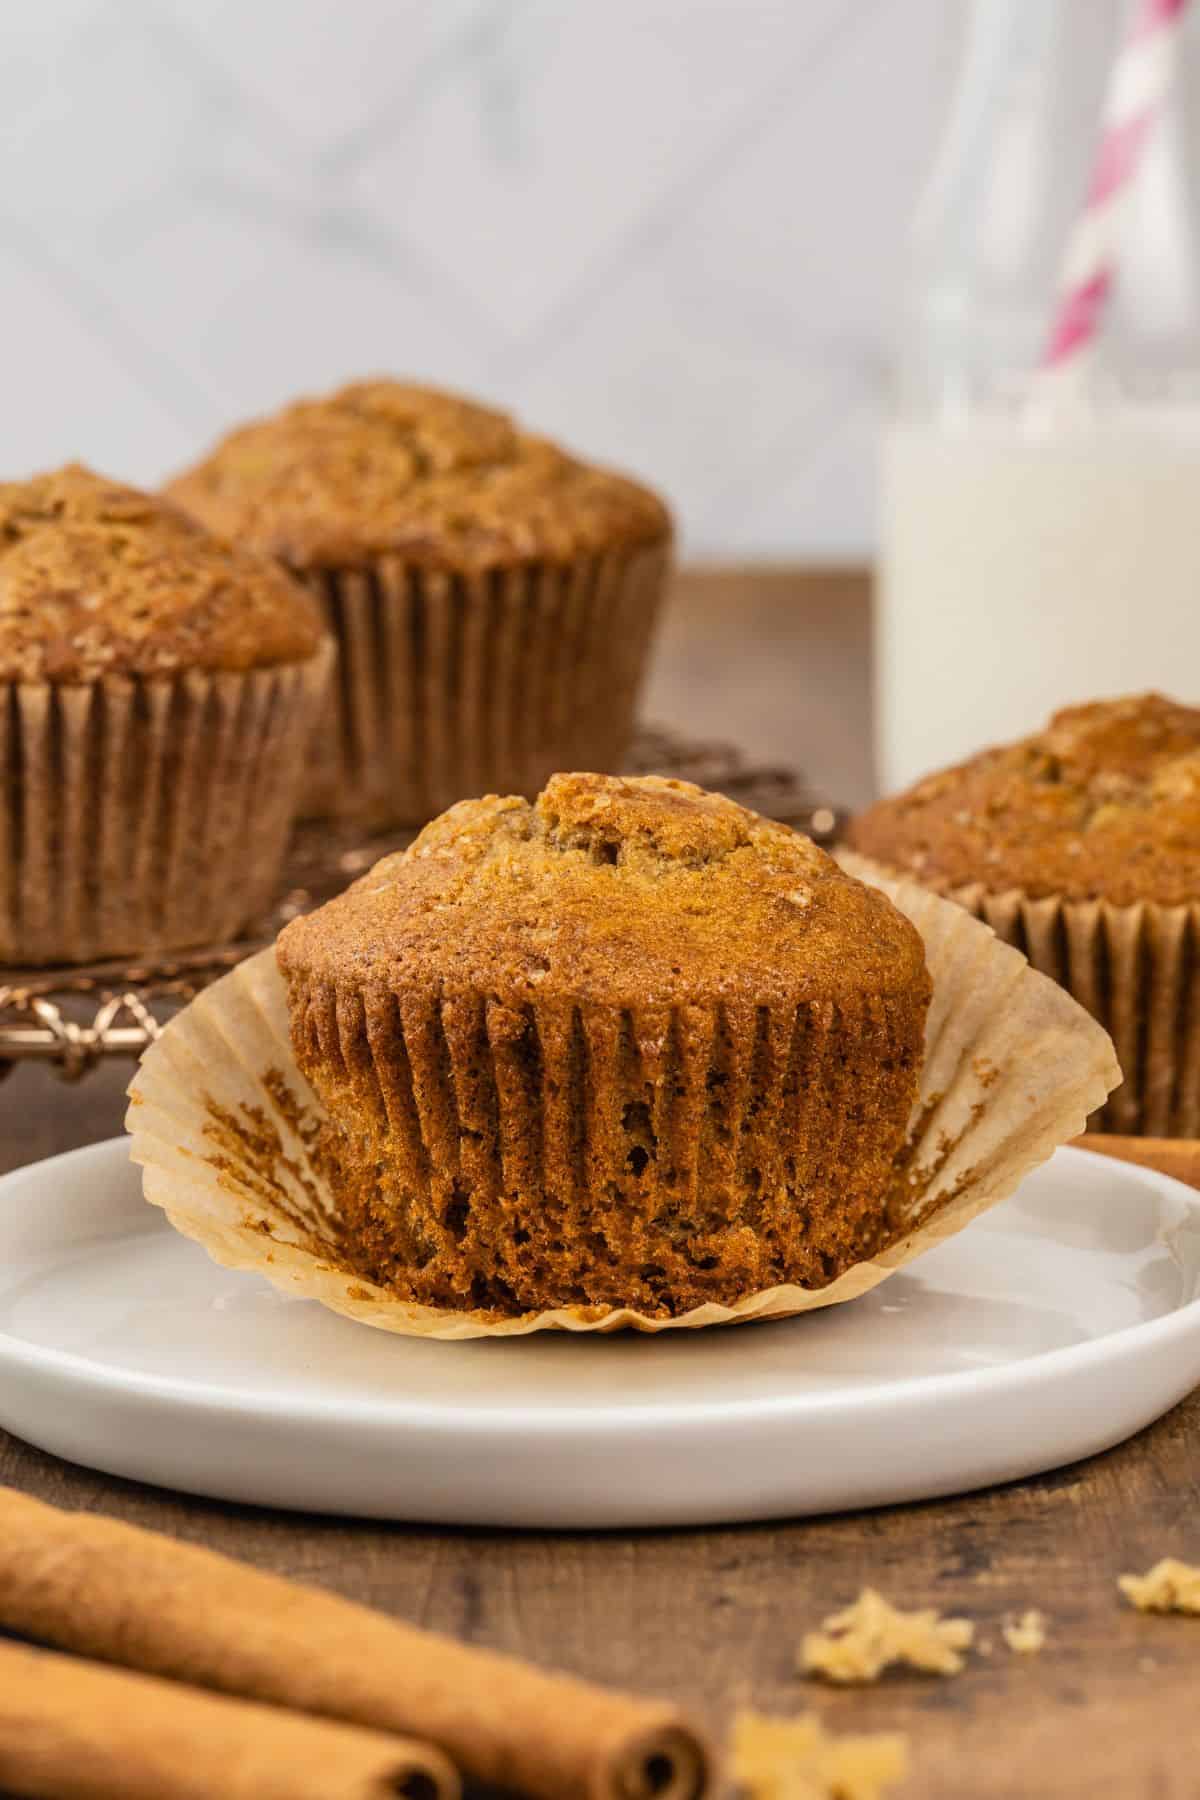 a single unwrapped gluten free banana muffin rests on a round white plate with more muffins and cinnamon sticks blurred in the background and foreground